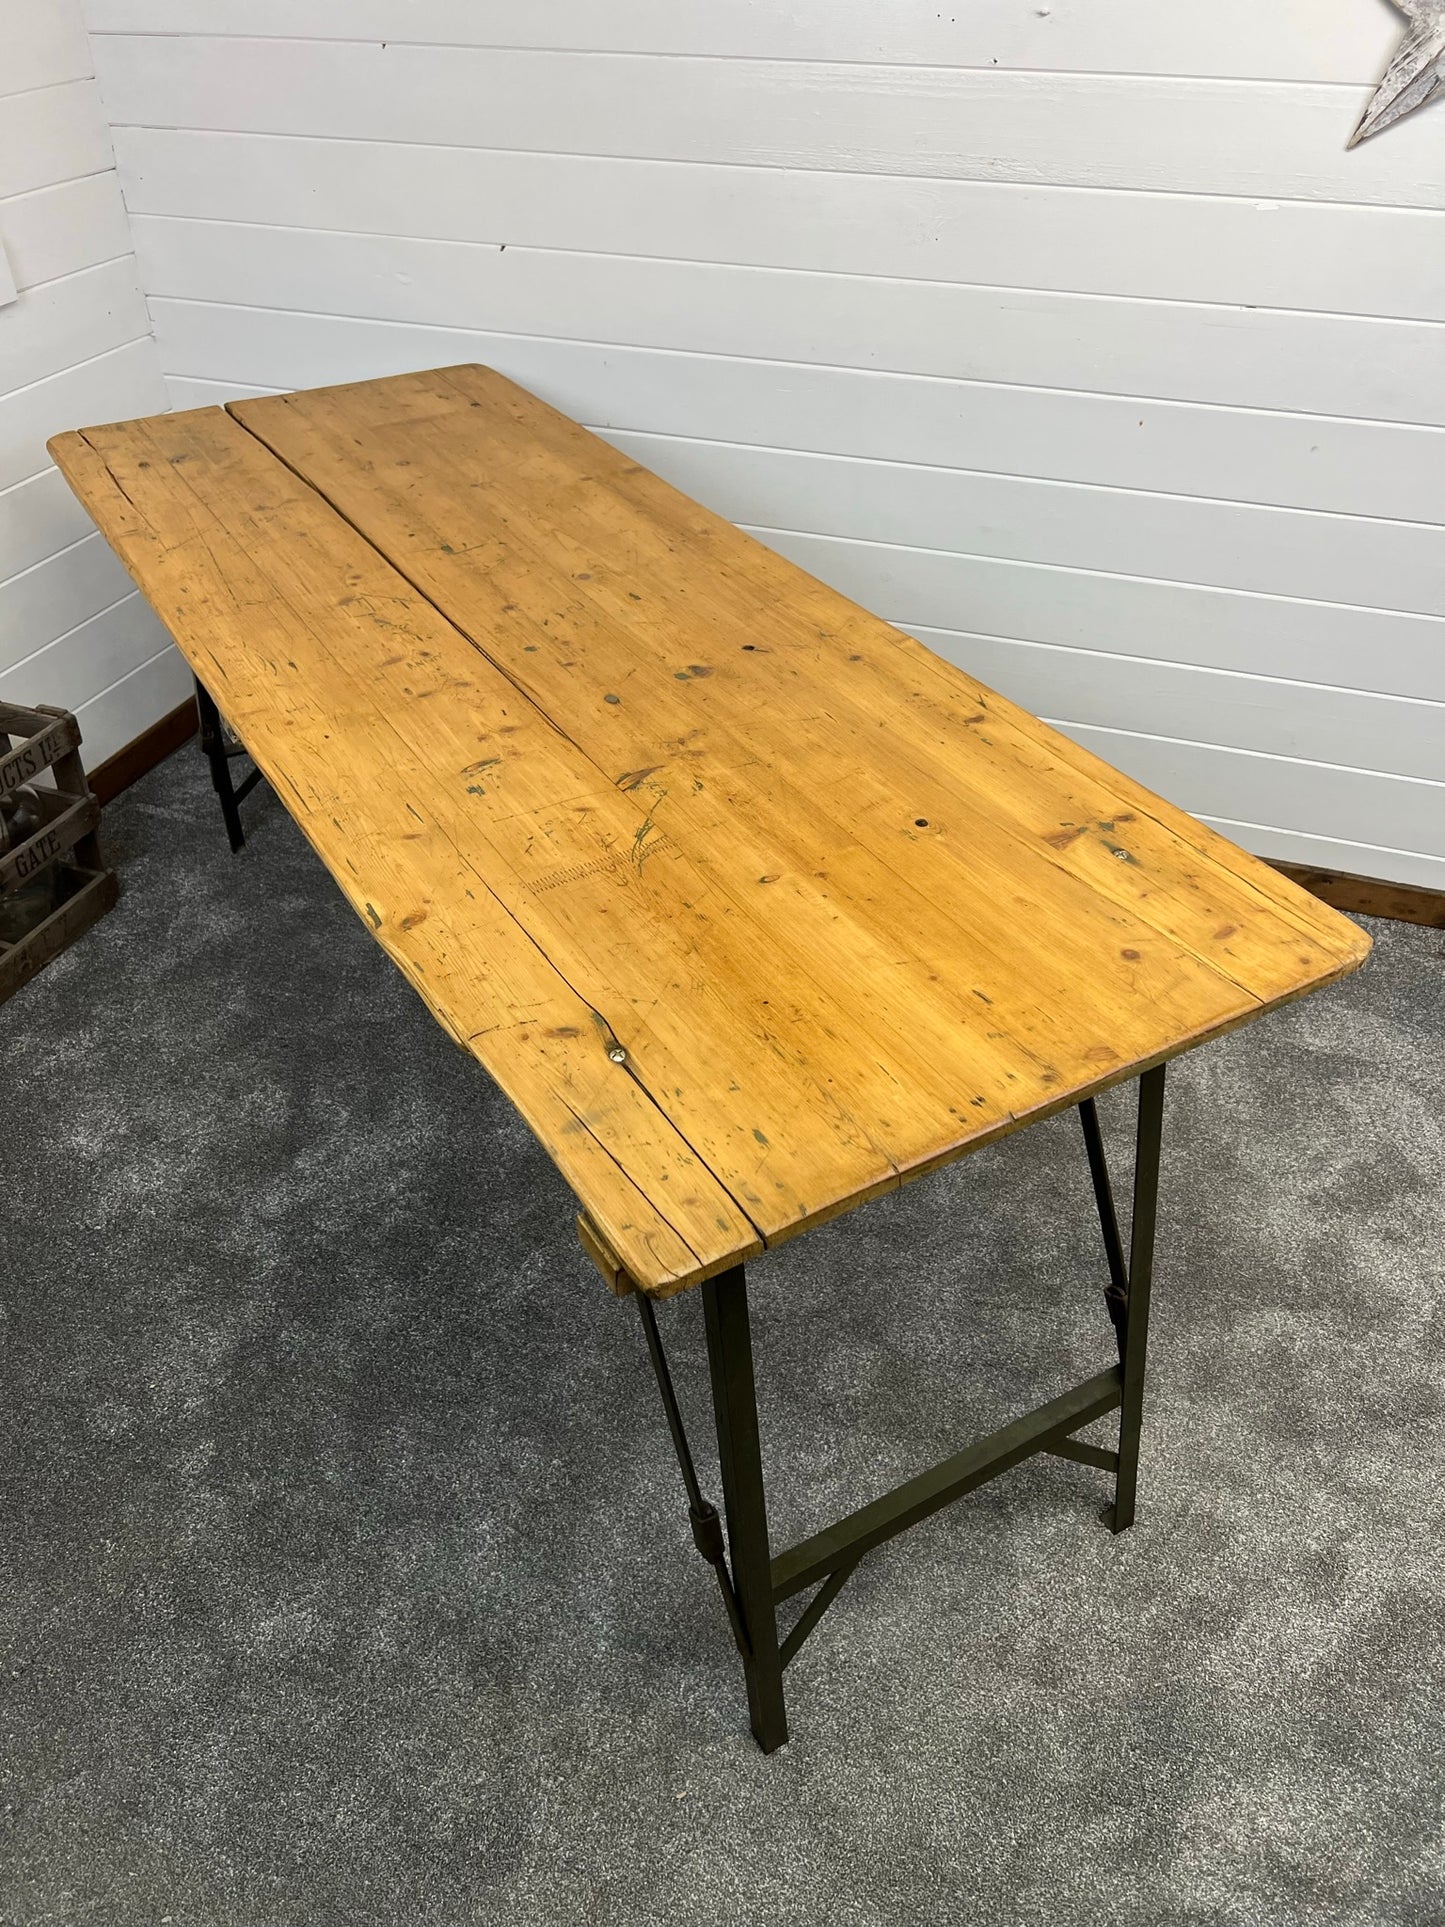 Vintage Industrial Wooden Trestle Table Rustic Folding Farmhouse Dining Boho Event